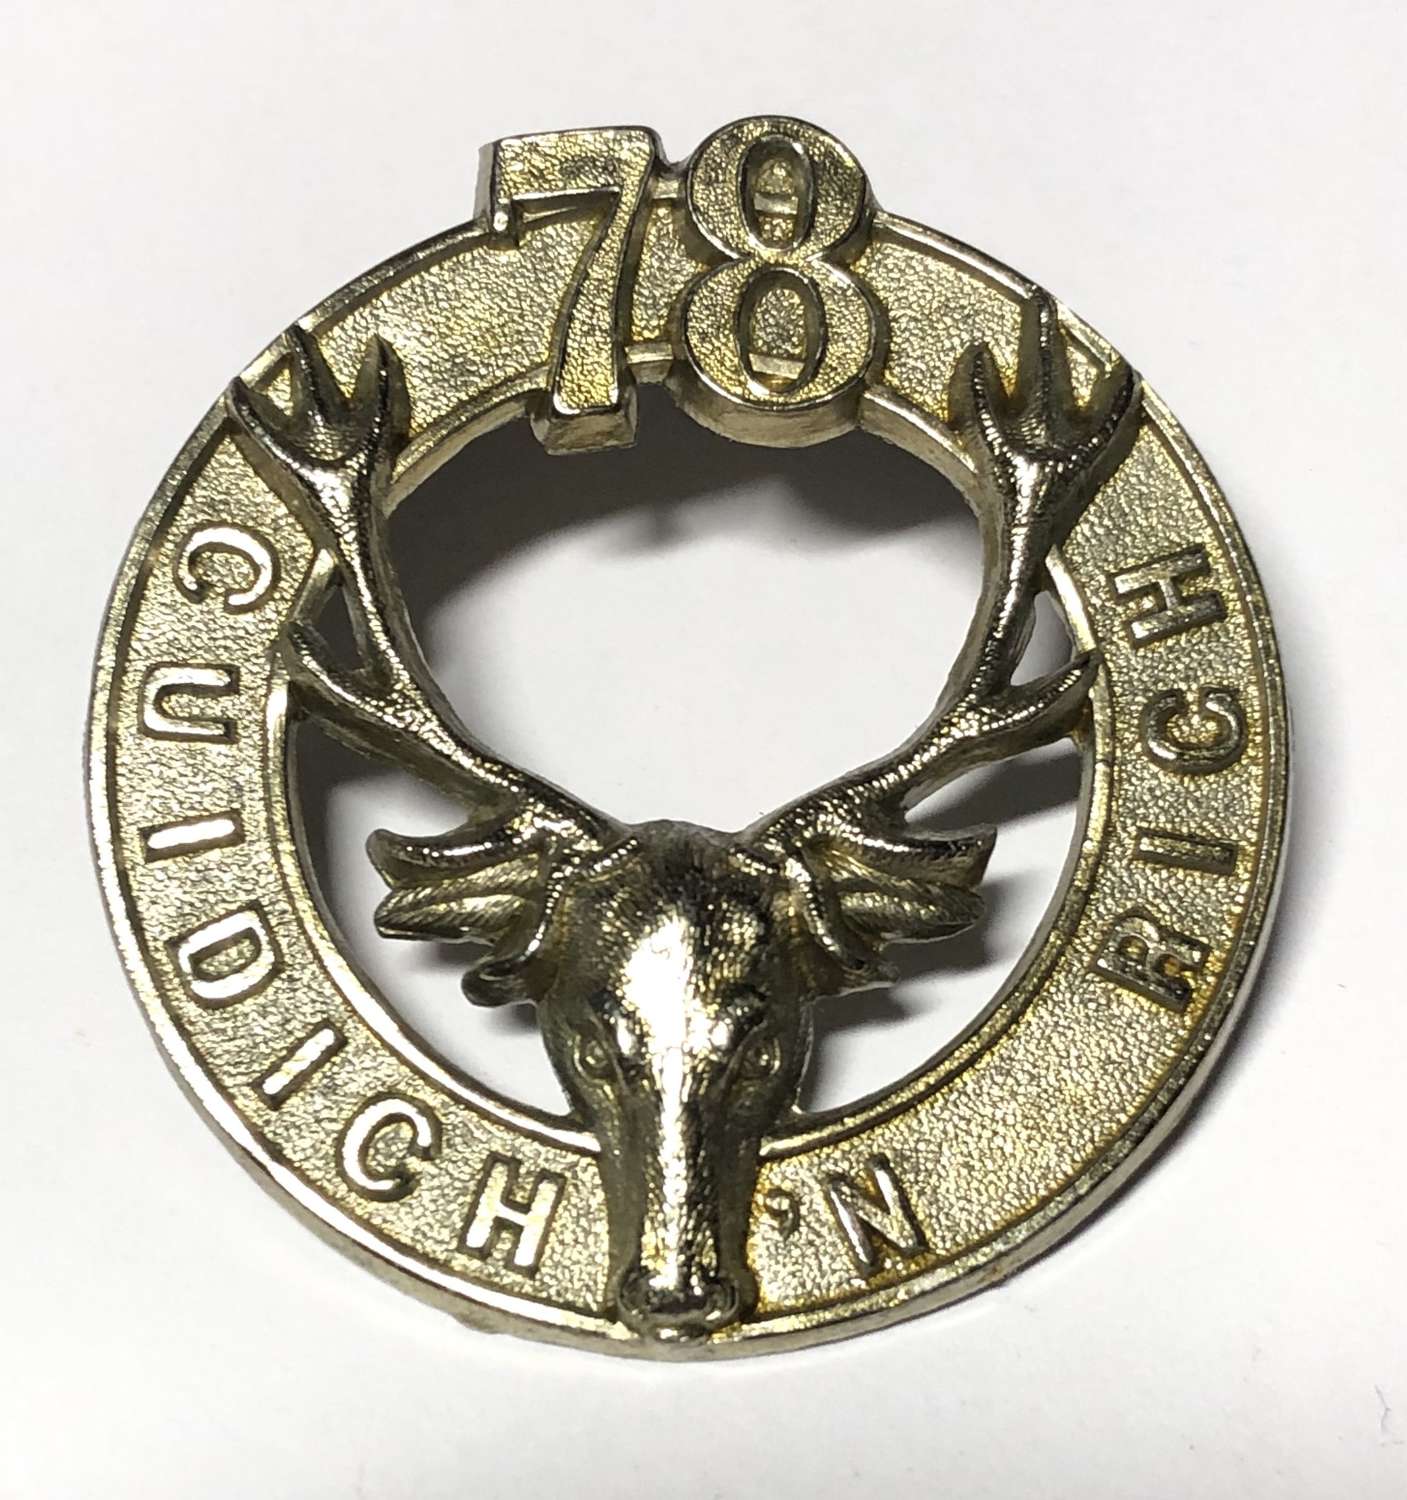 Canada. 78th Pictou Highlanders post 1910 glengarry badge